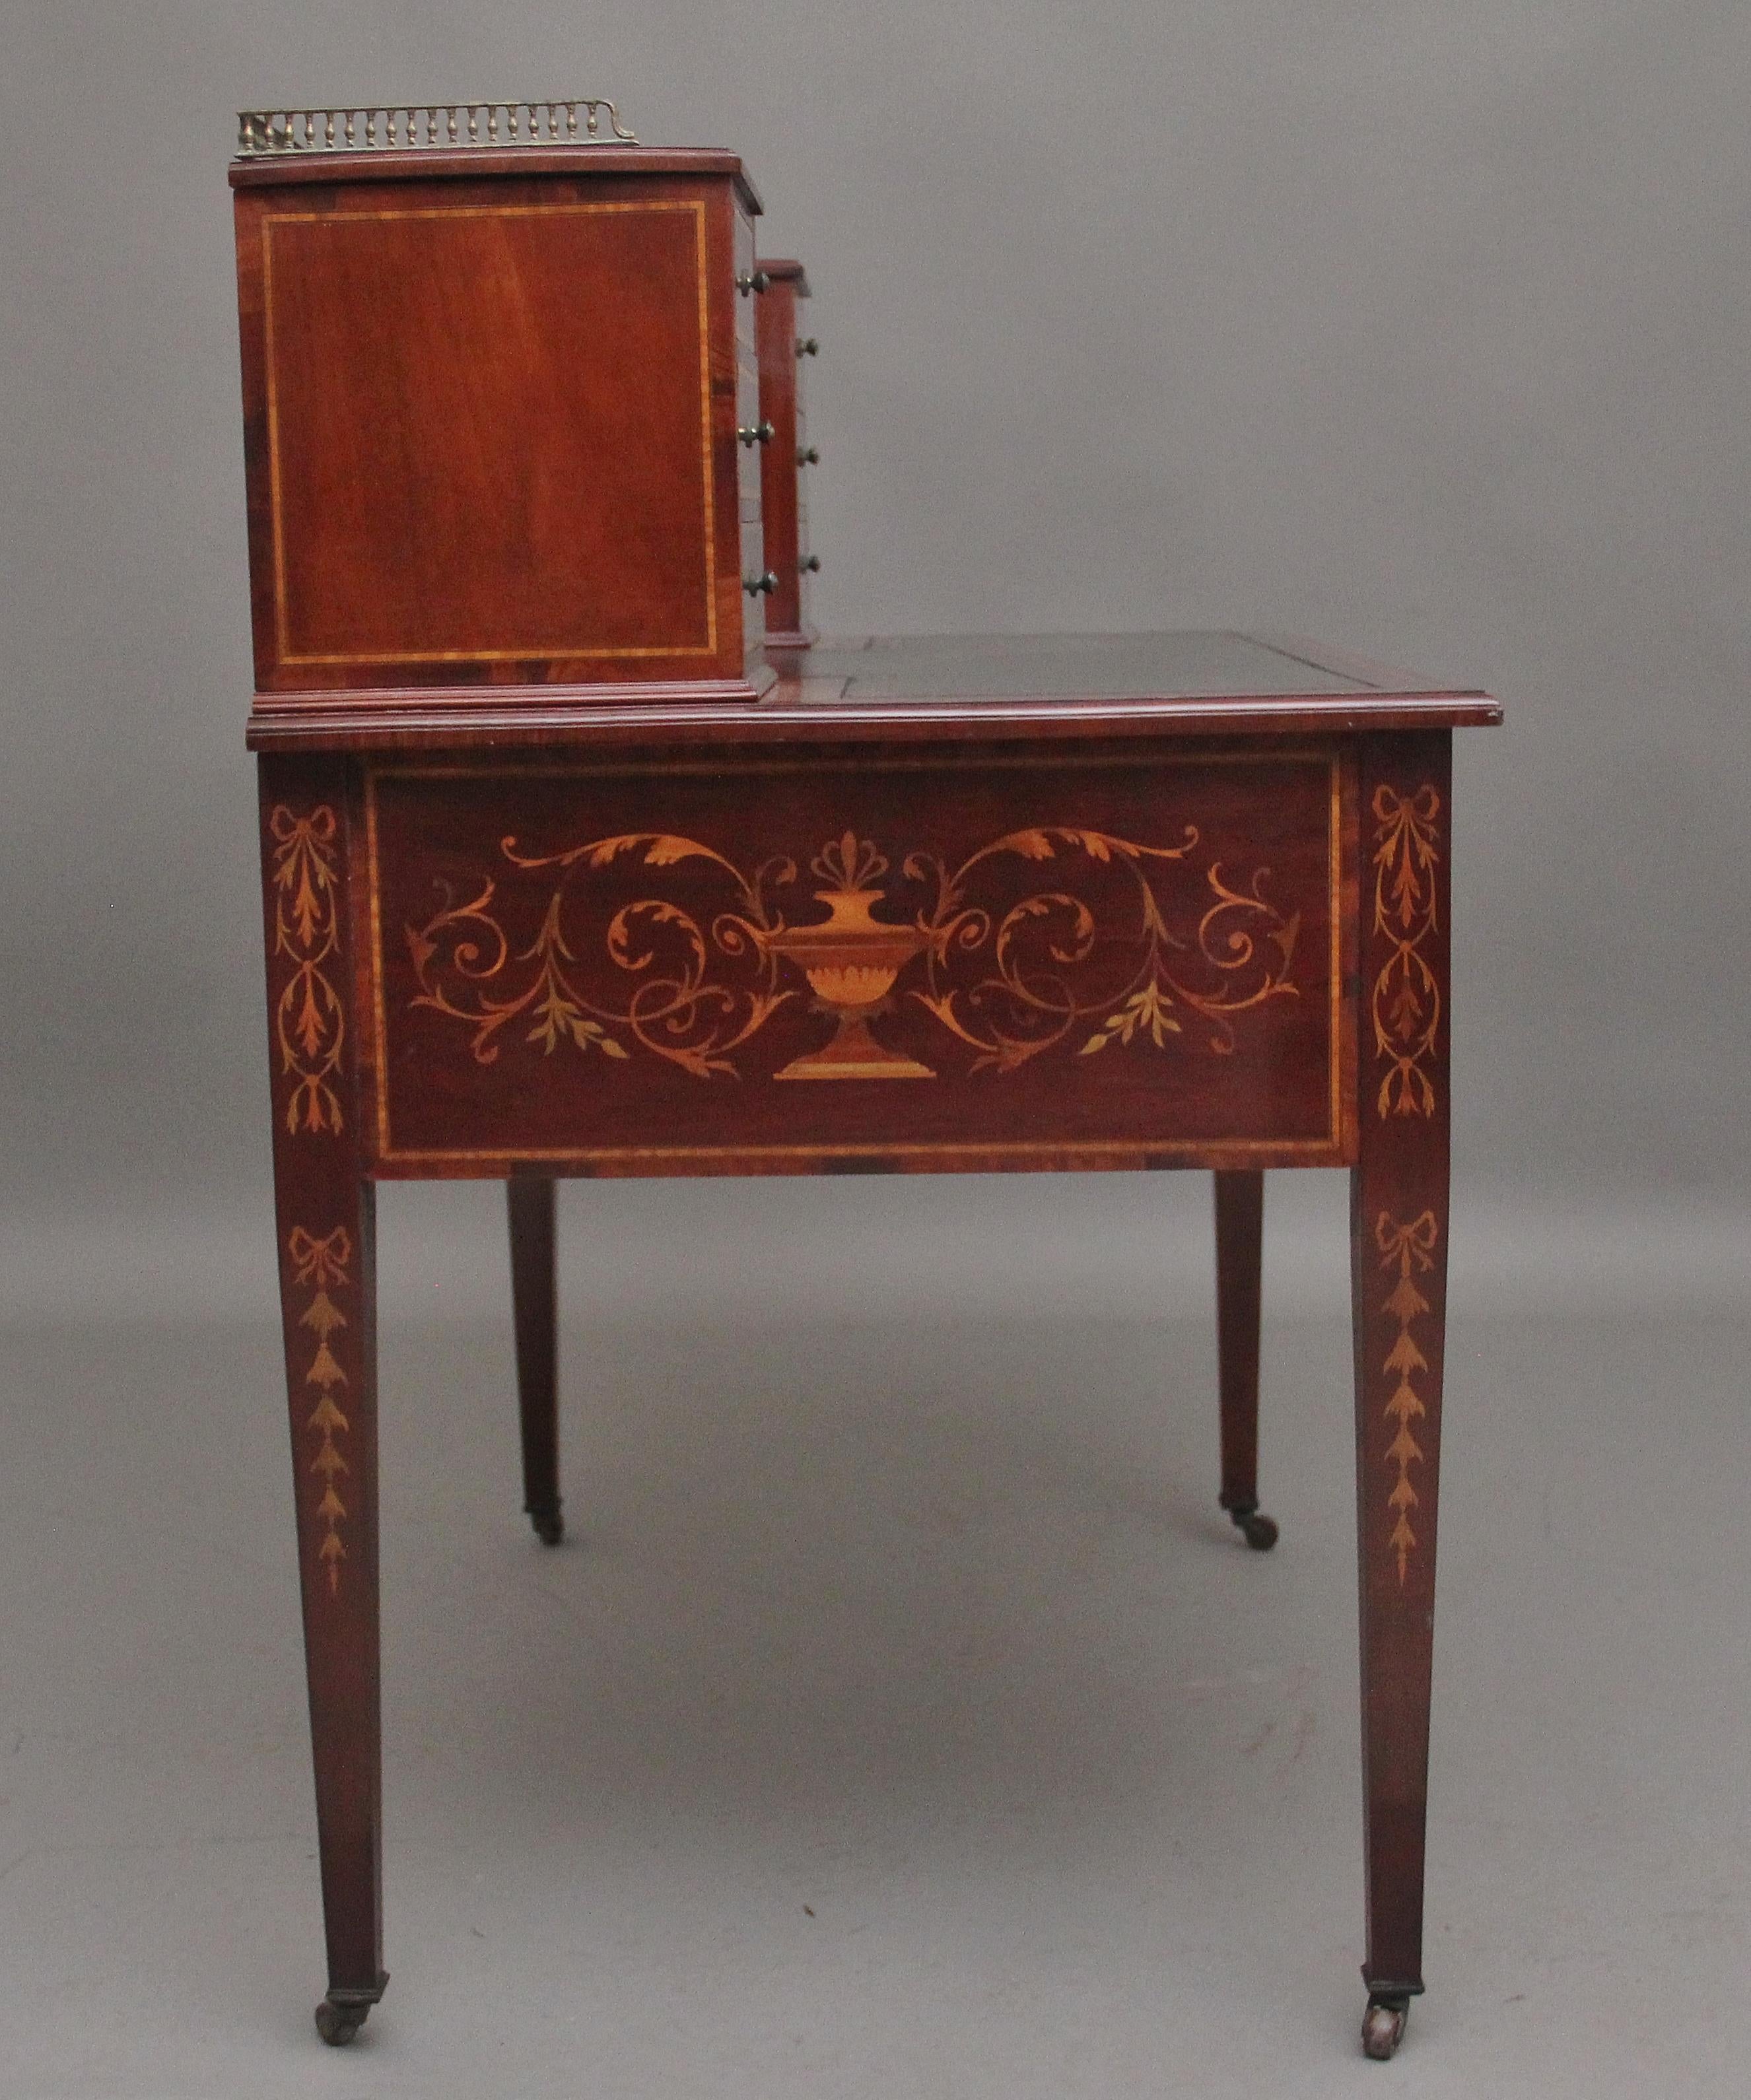 19th Century mahogany inlaid writing desk In Good Condition For Sale In Martlesham, GB